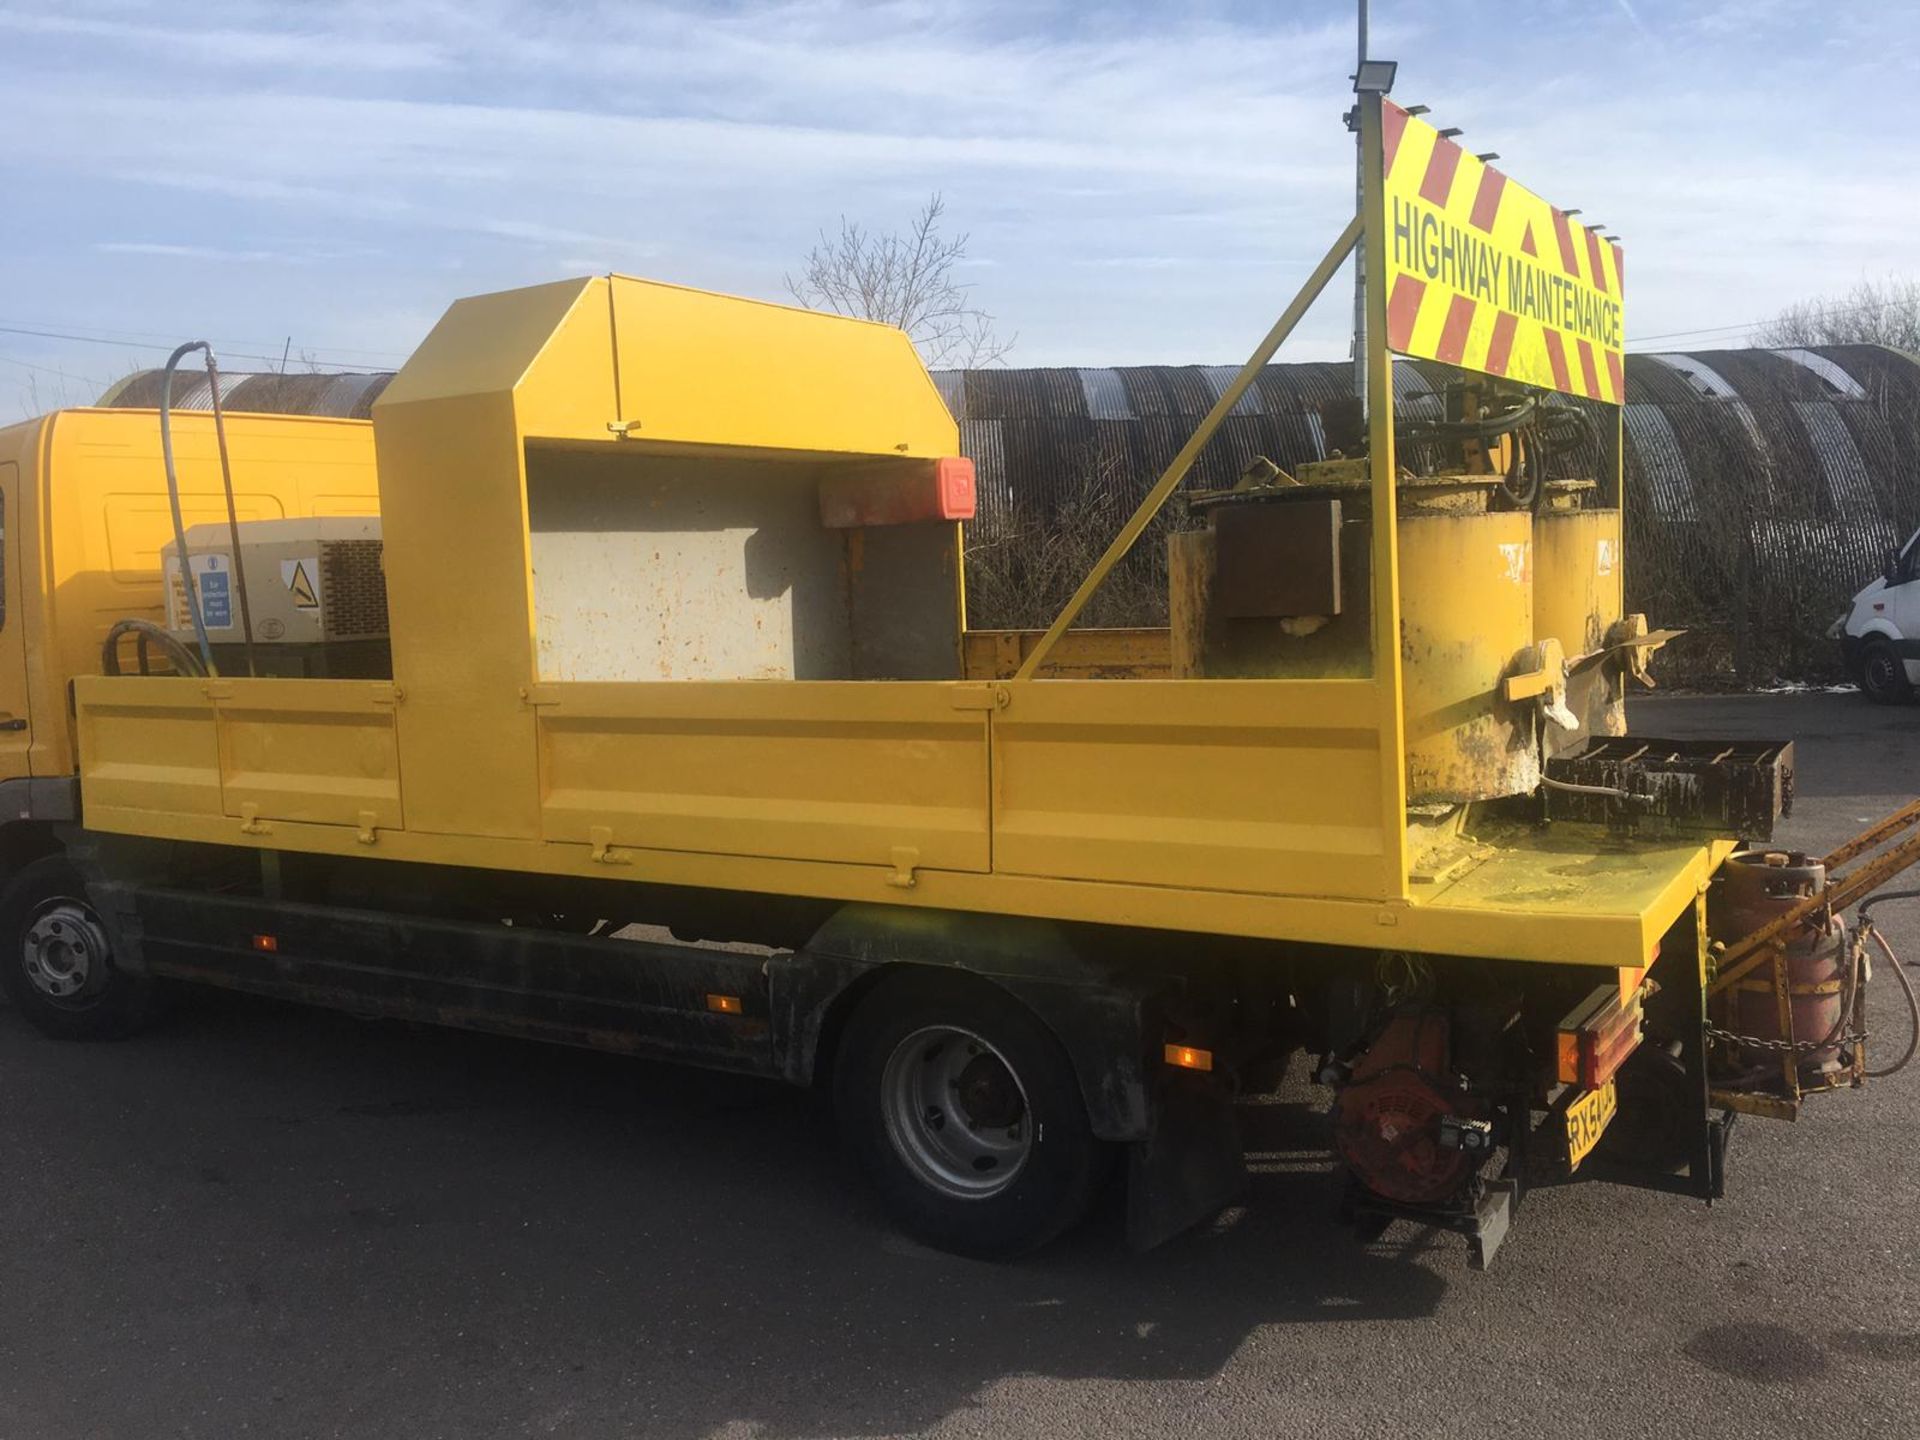 2004/54 REG MERCEDES ATEGO 1018 DAY YELLOW DROPSIDE LINE PAINTING LORRY 4.3L DIESEL ENGINE *NO VAT* - Image 5 of 64